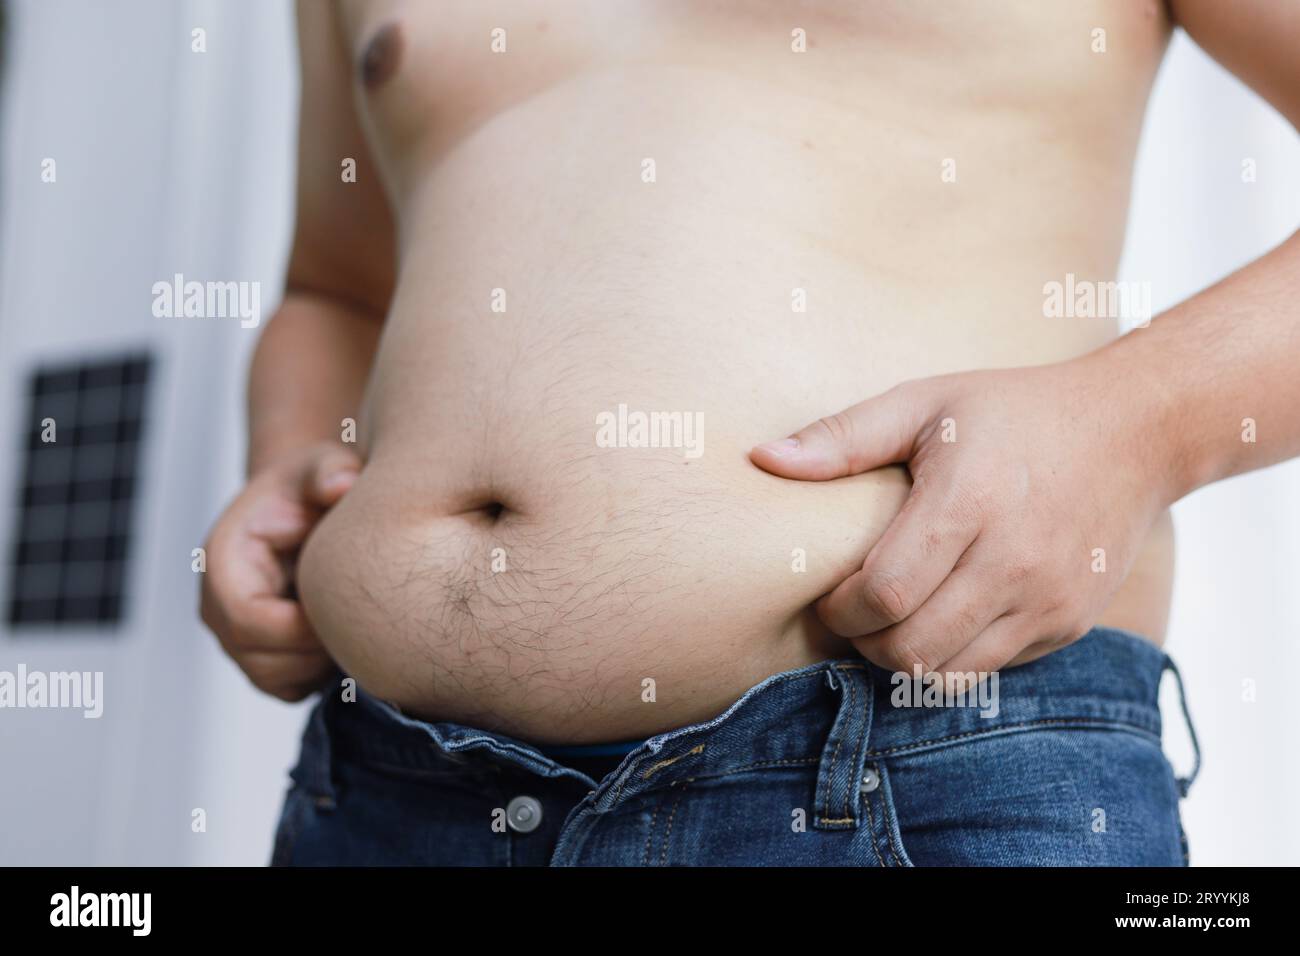 https://c8.alamy.com/comp/2RYYKJ8/man-with-fat-belly-in-dieting-concept-overweight-man-touching-his-fat-belly-and-want-to-lose-weight-2RYYKJ8.jpg